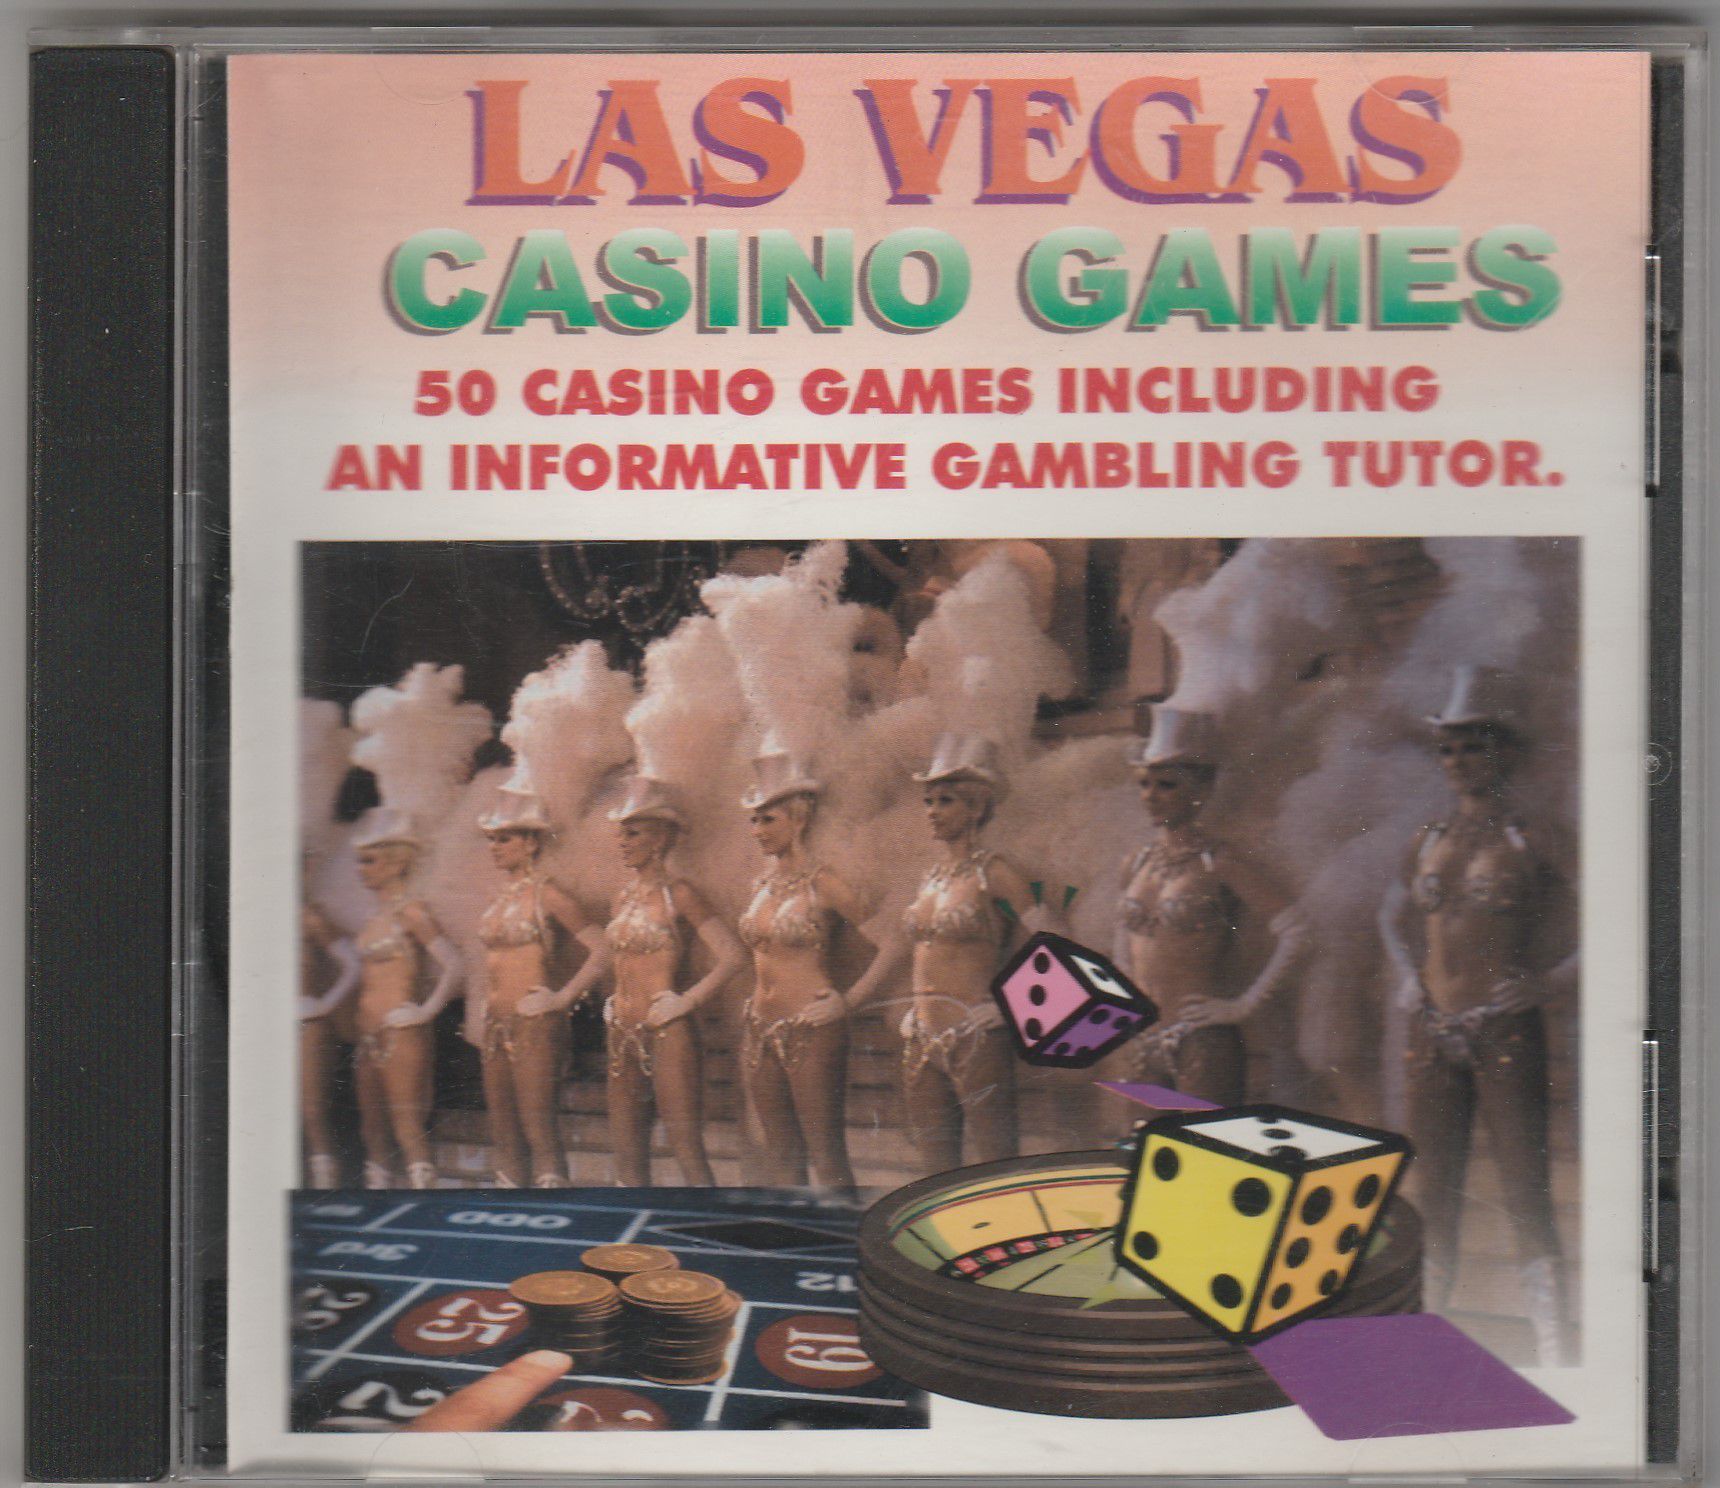 Las Vegas Casino Games CD-ROM by Powersource Multimedia USA for Windows